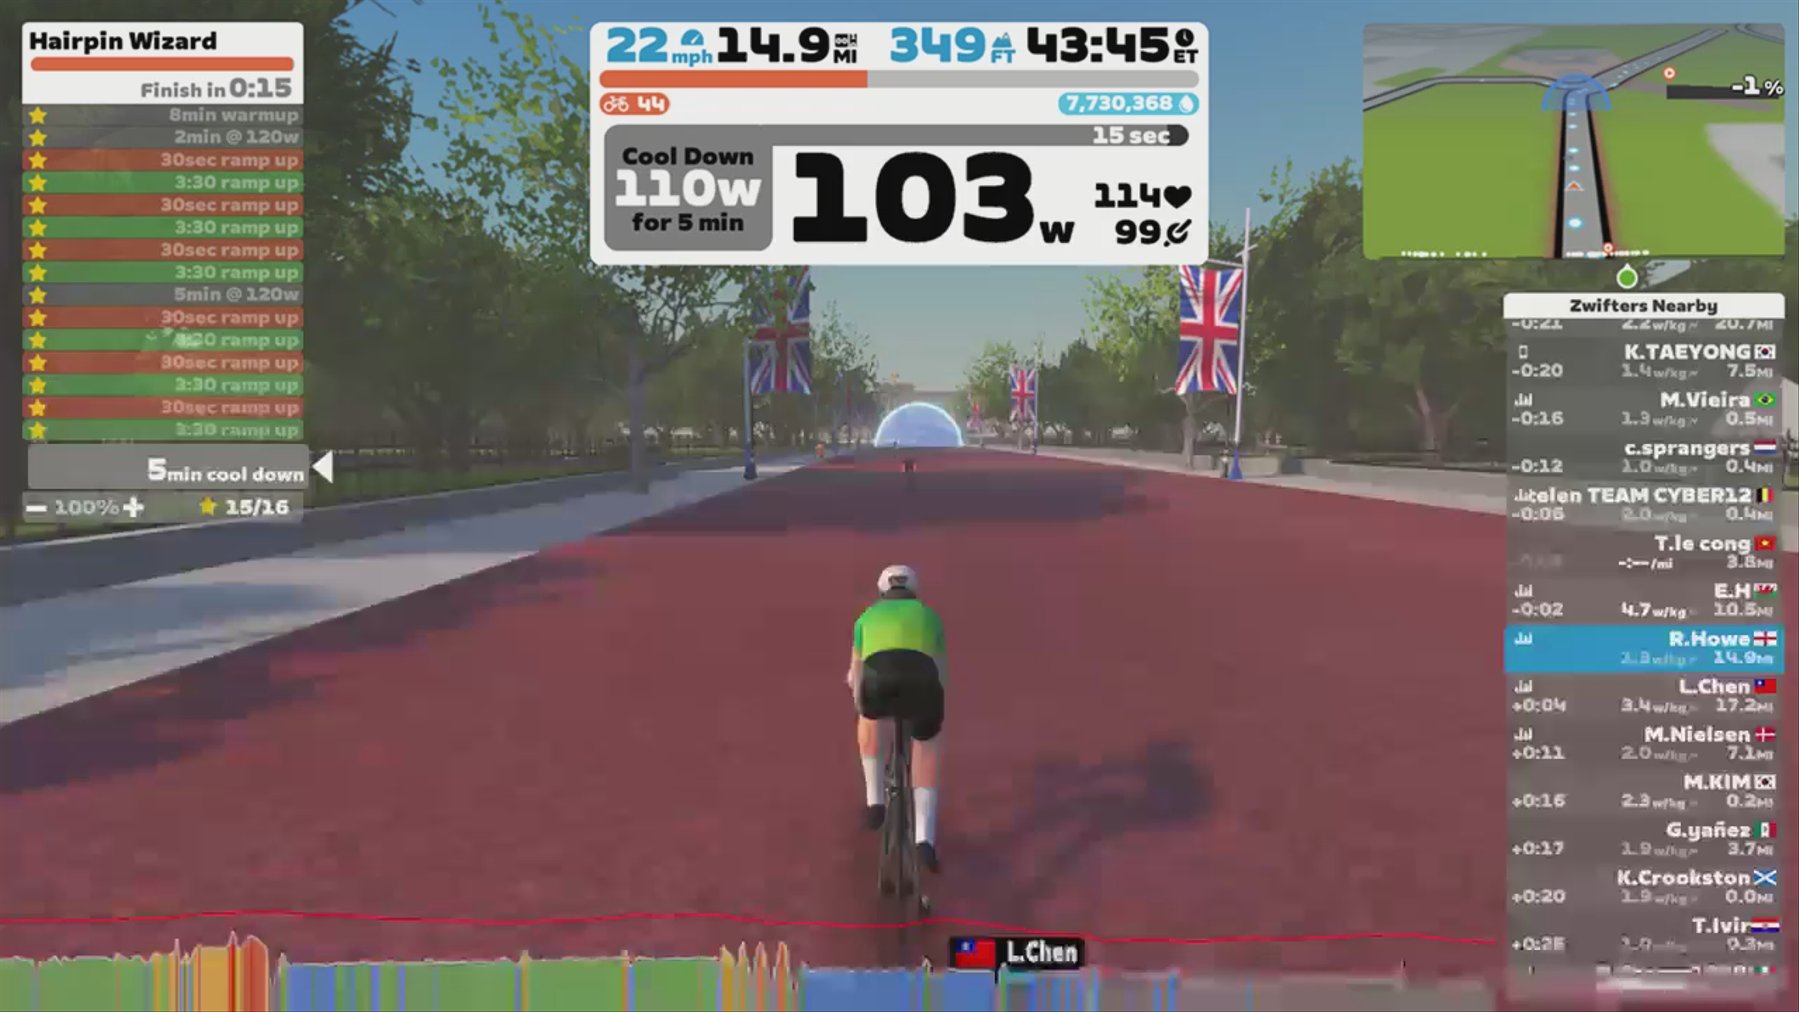 Zwift - Hairpin Wizard on Country to Coastal in London